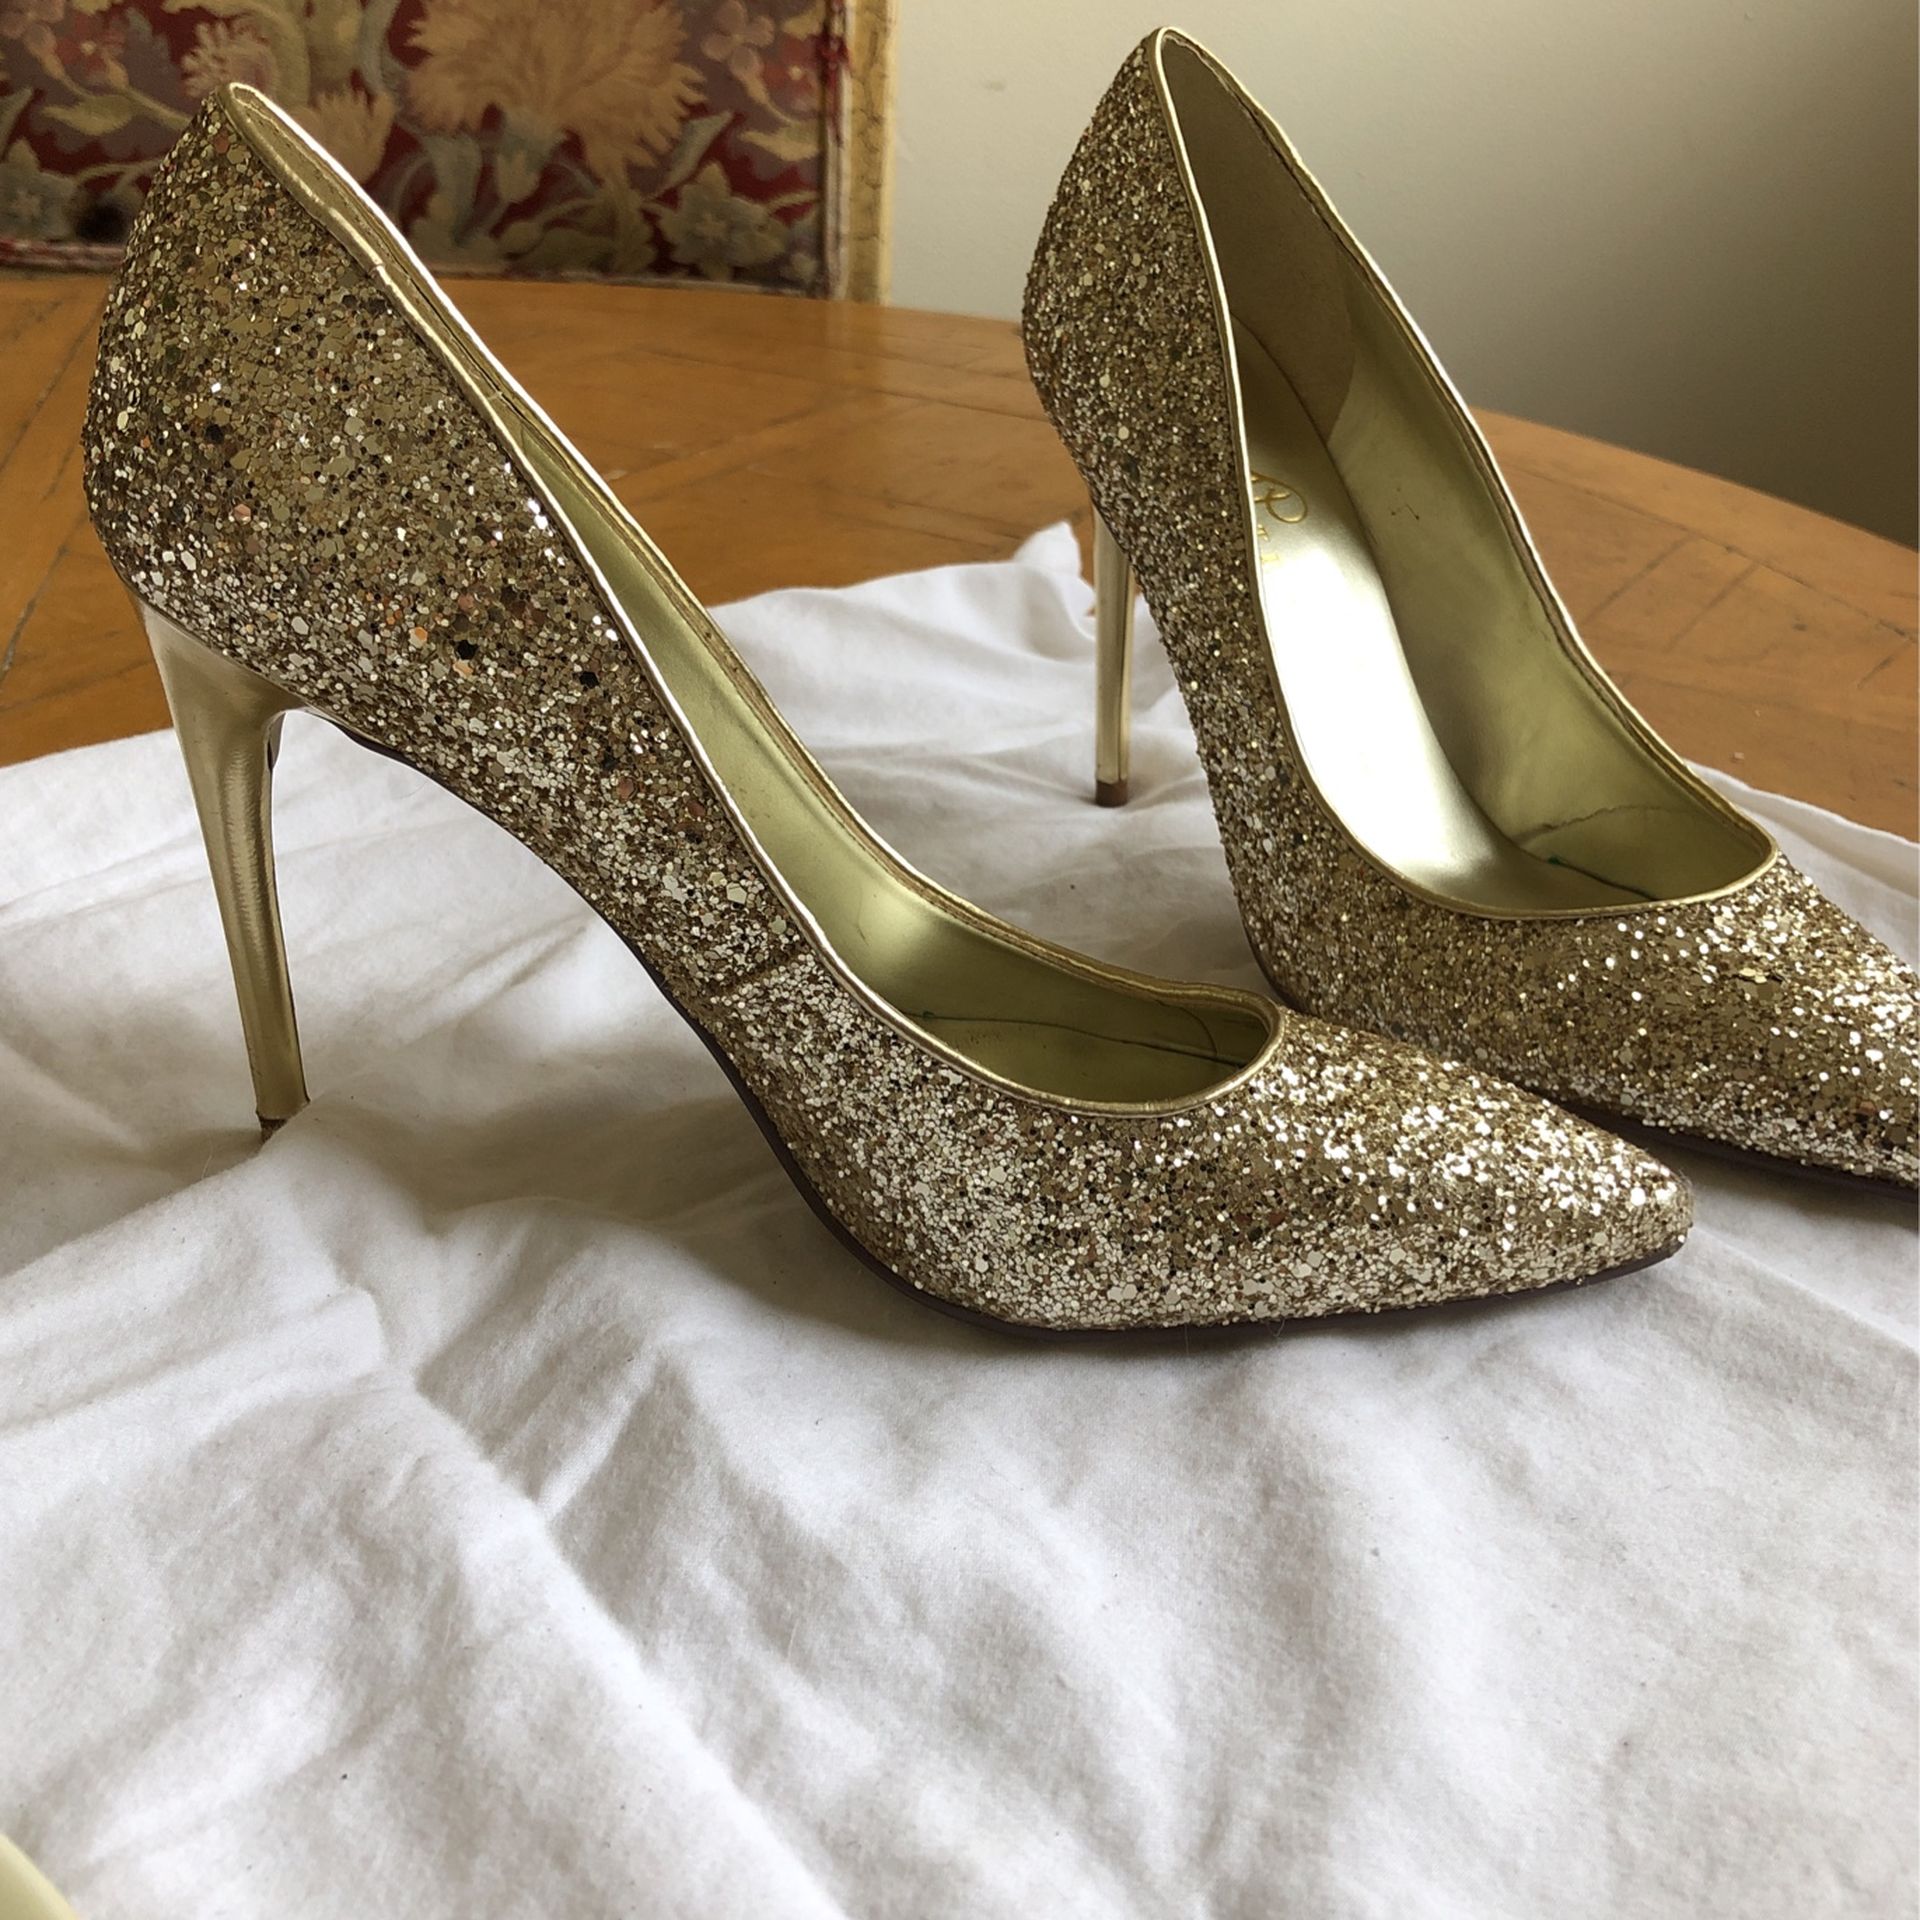 Gold Dress Pumps for Sale in Branford, CT - OfferUp